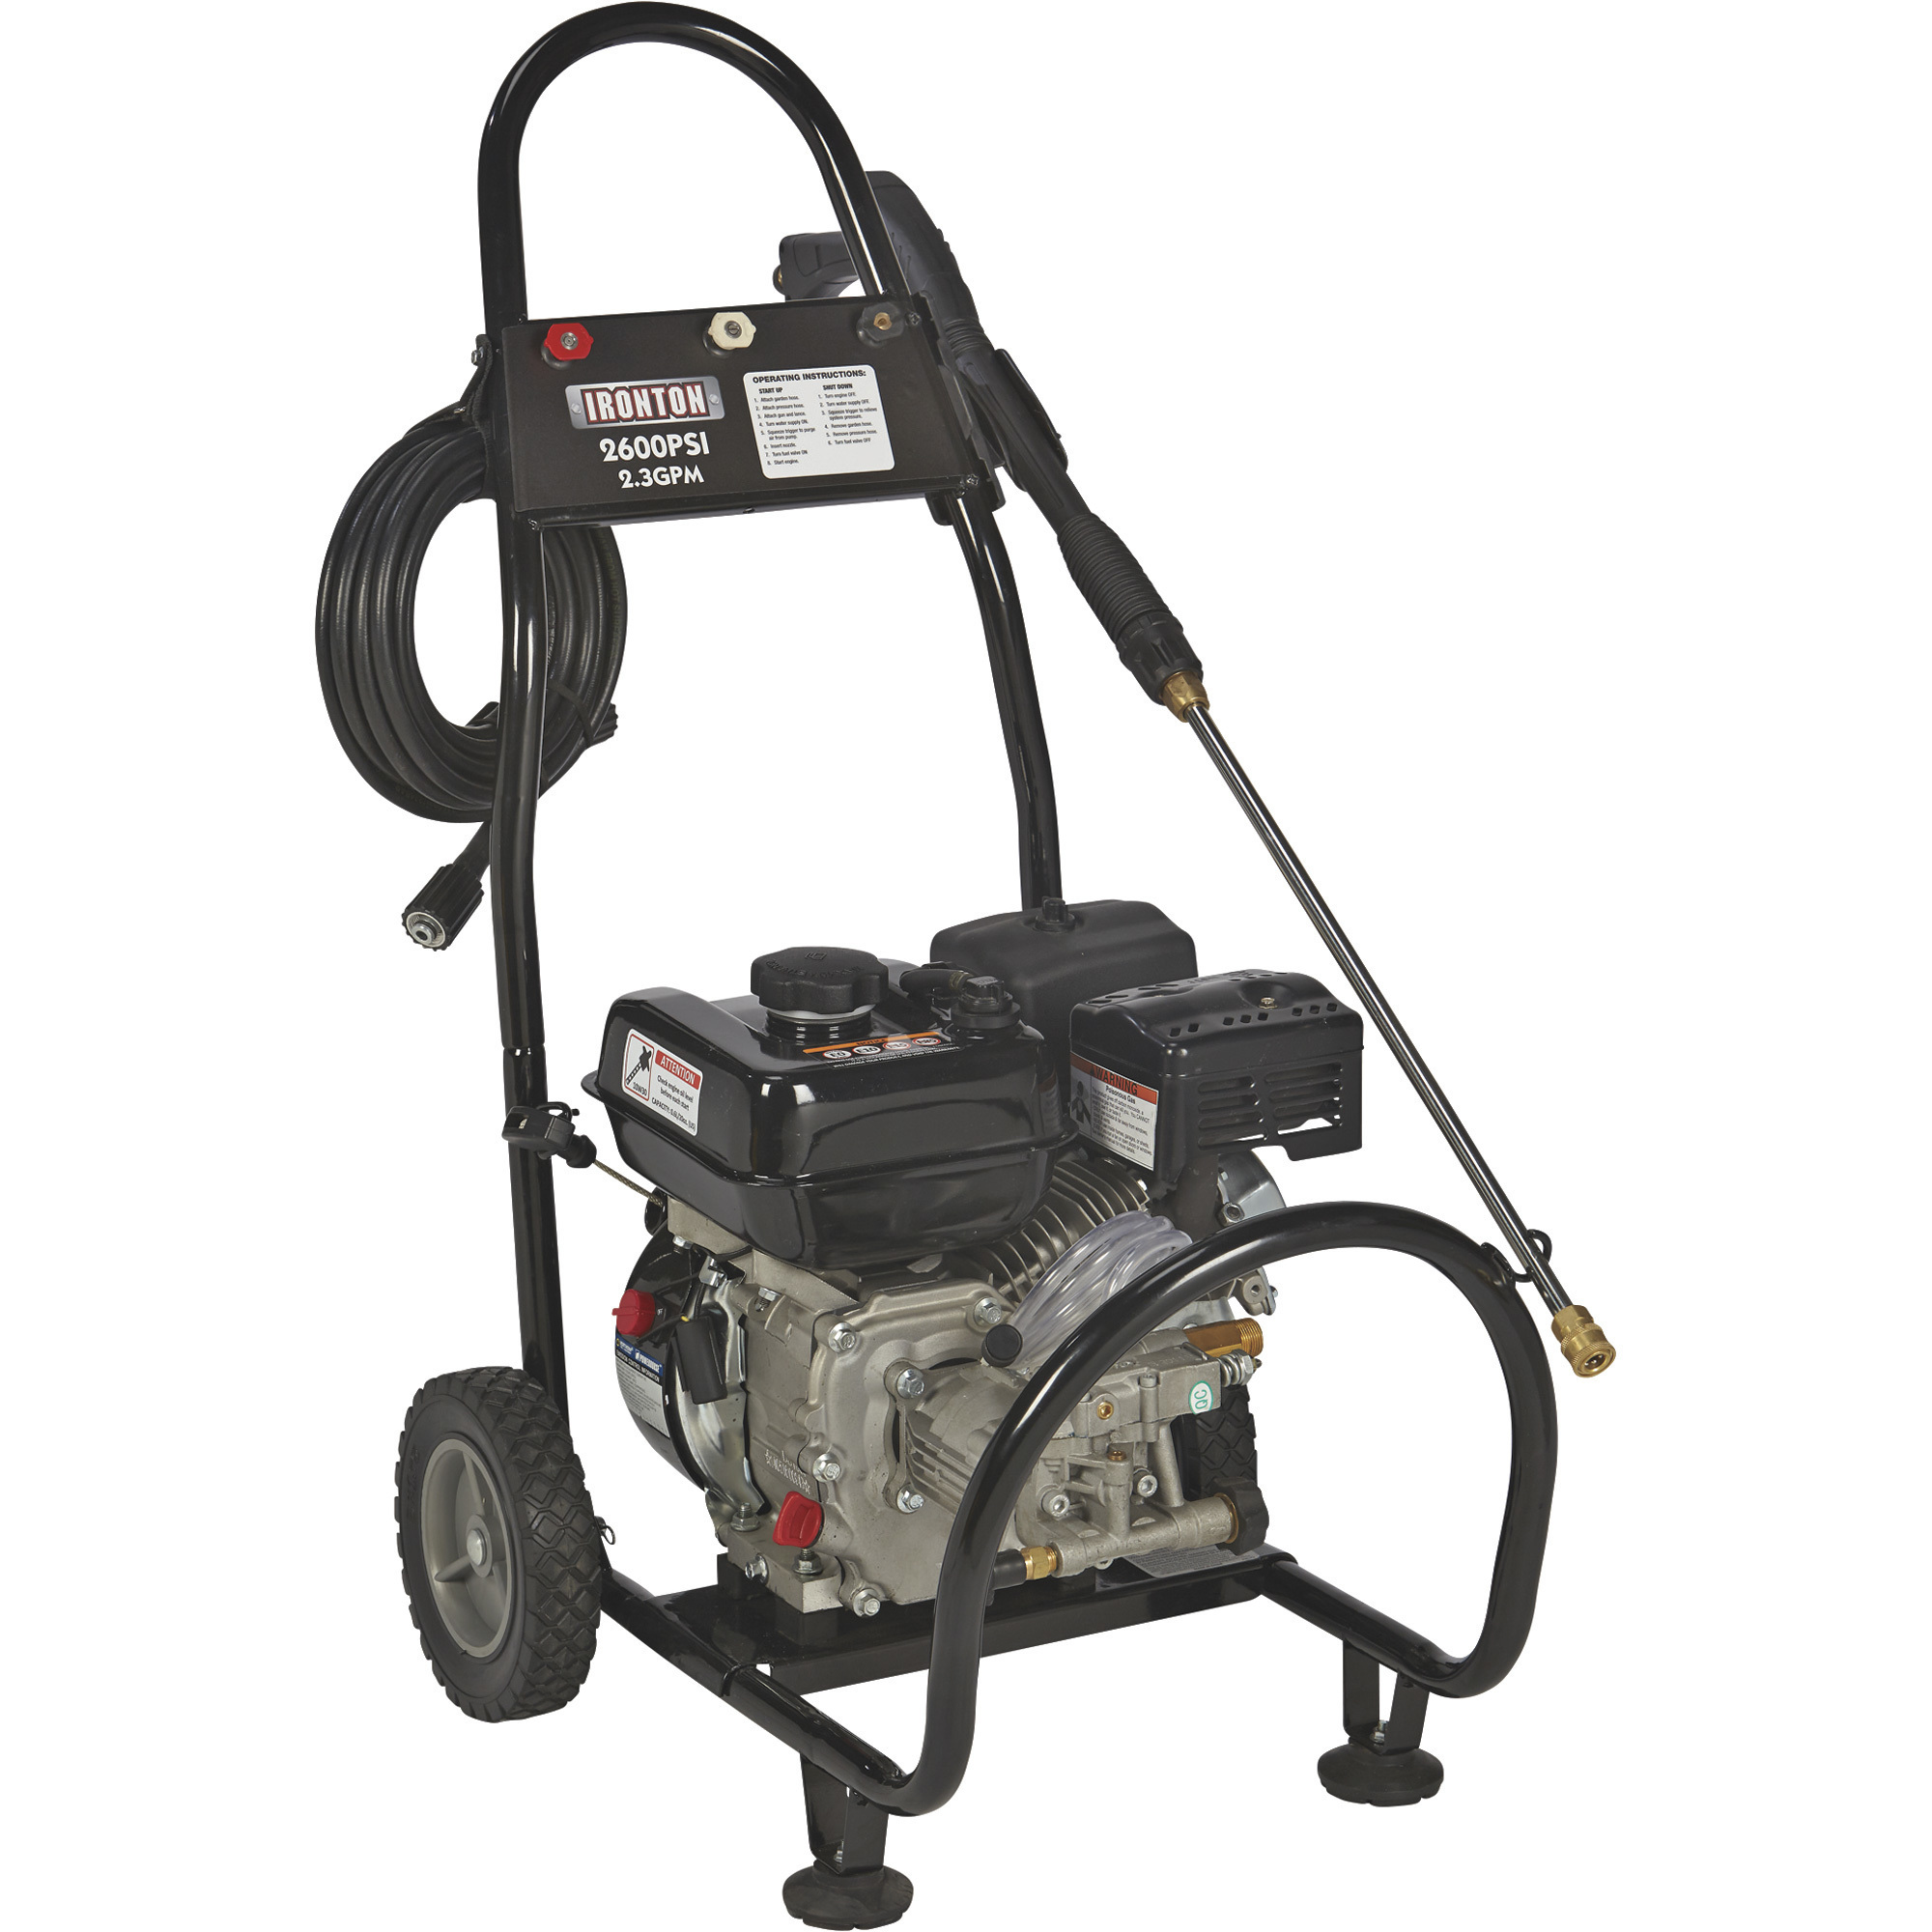 Electric Pressure Washer - 2600 PSI Pressure Washer, 2.0 GPM Electric Power  Washer 1600W High Pressure Washer with 4 Nozzles, Spray Bottle and Hose